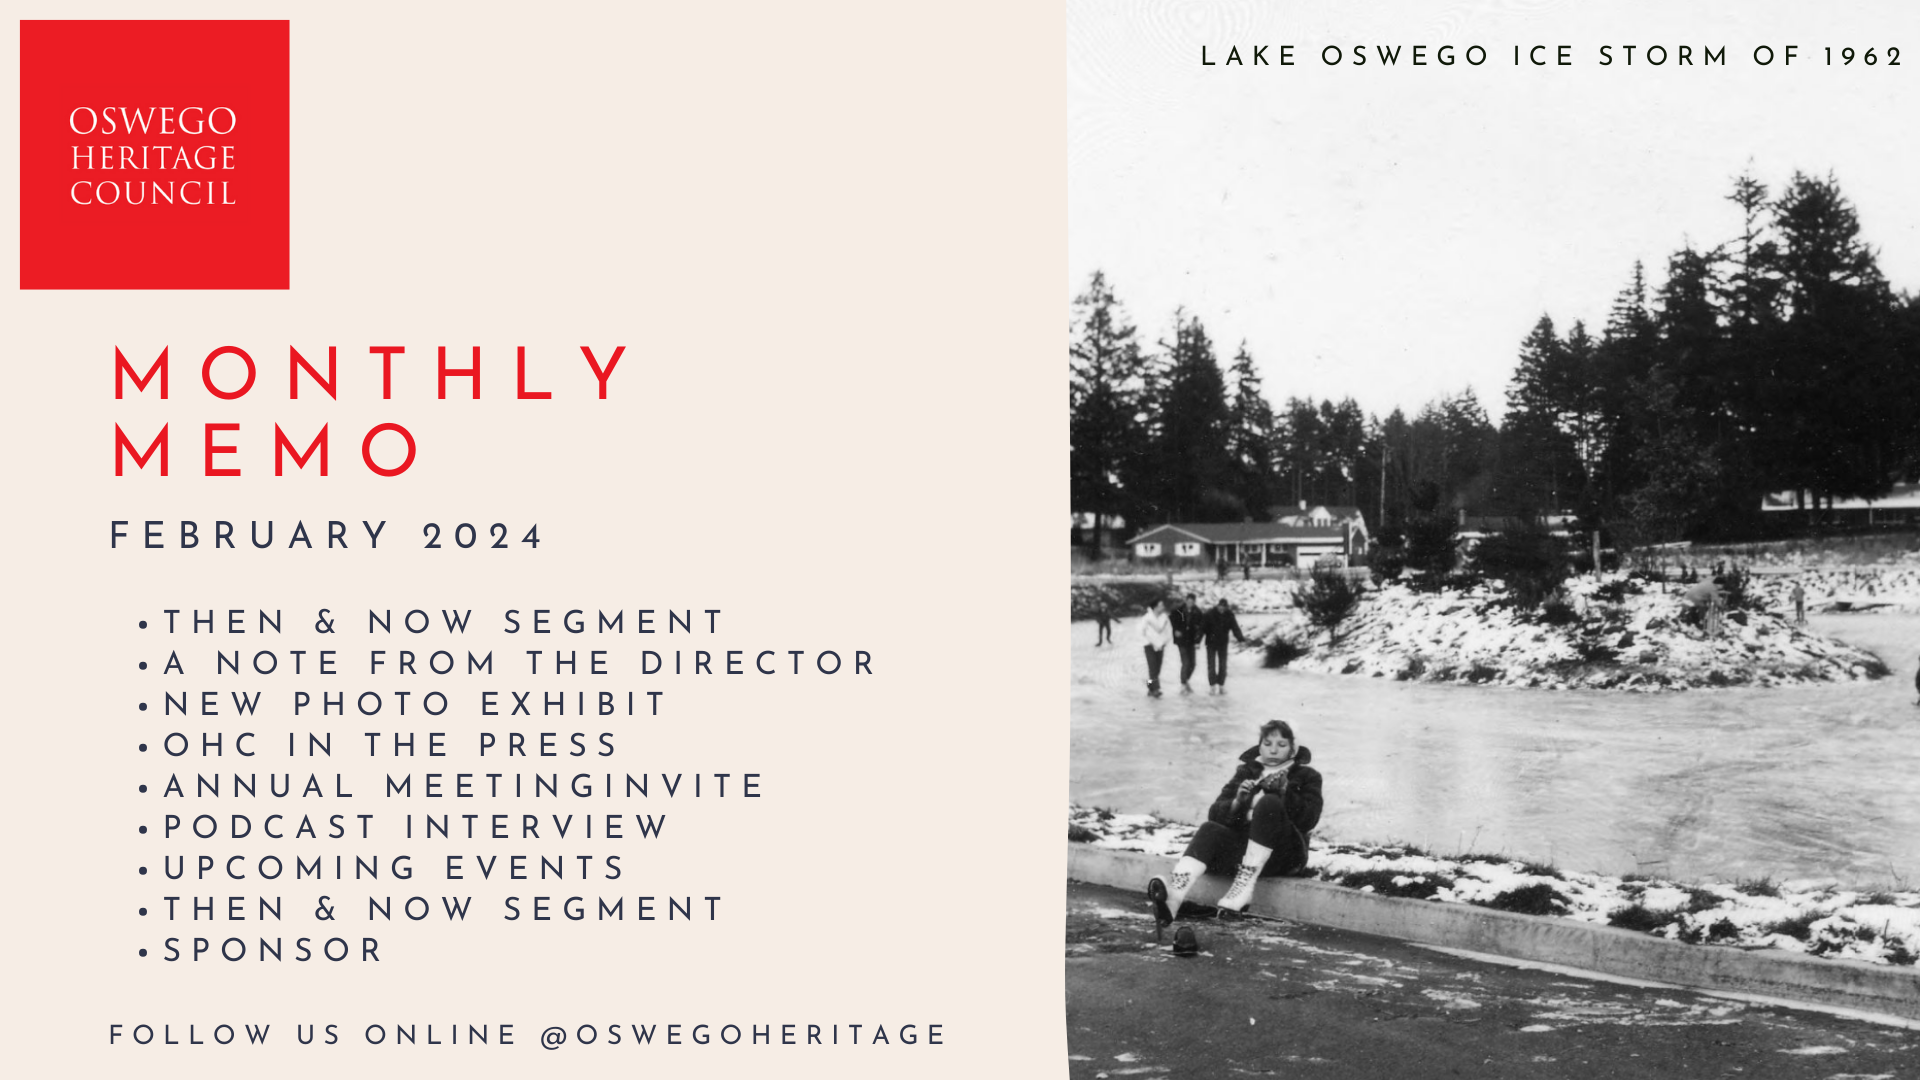 Monthly memo for February 2024 includes: Then & Now segment, a note from the director, new photo exhibit, OHC in the press, annual meeting invite, podcast interview, upcoming events, then & now segment, and sponsor. There is a photo to the right of Lake Oswego during the ice storm of 1962.